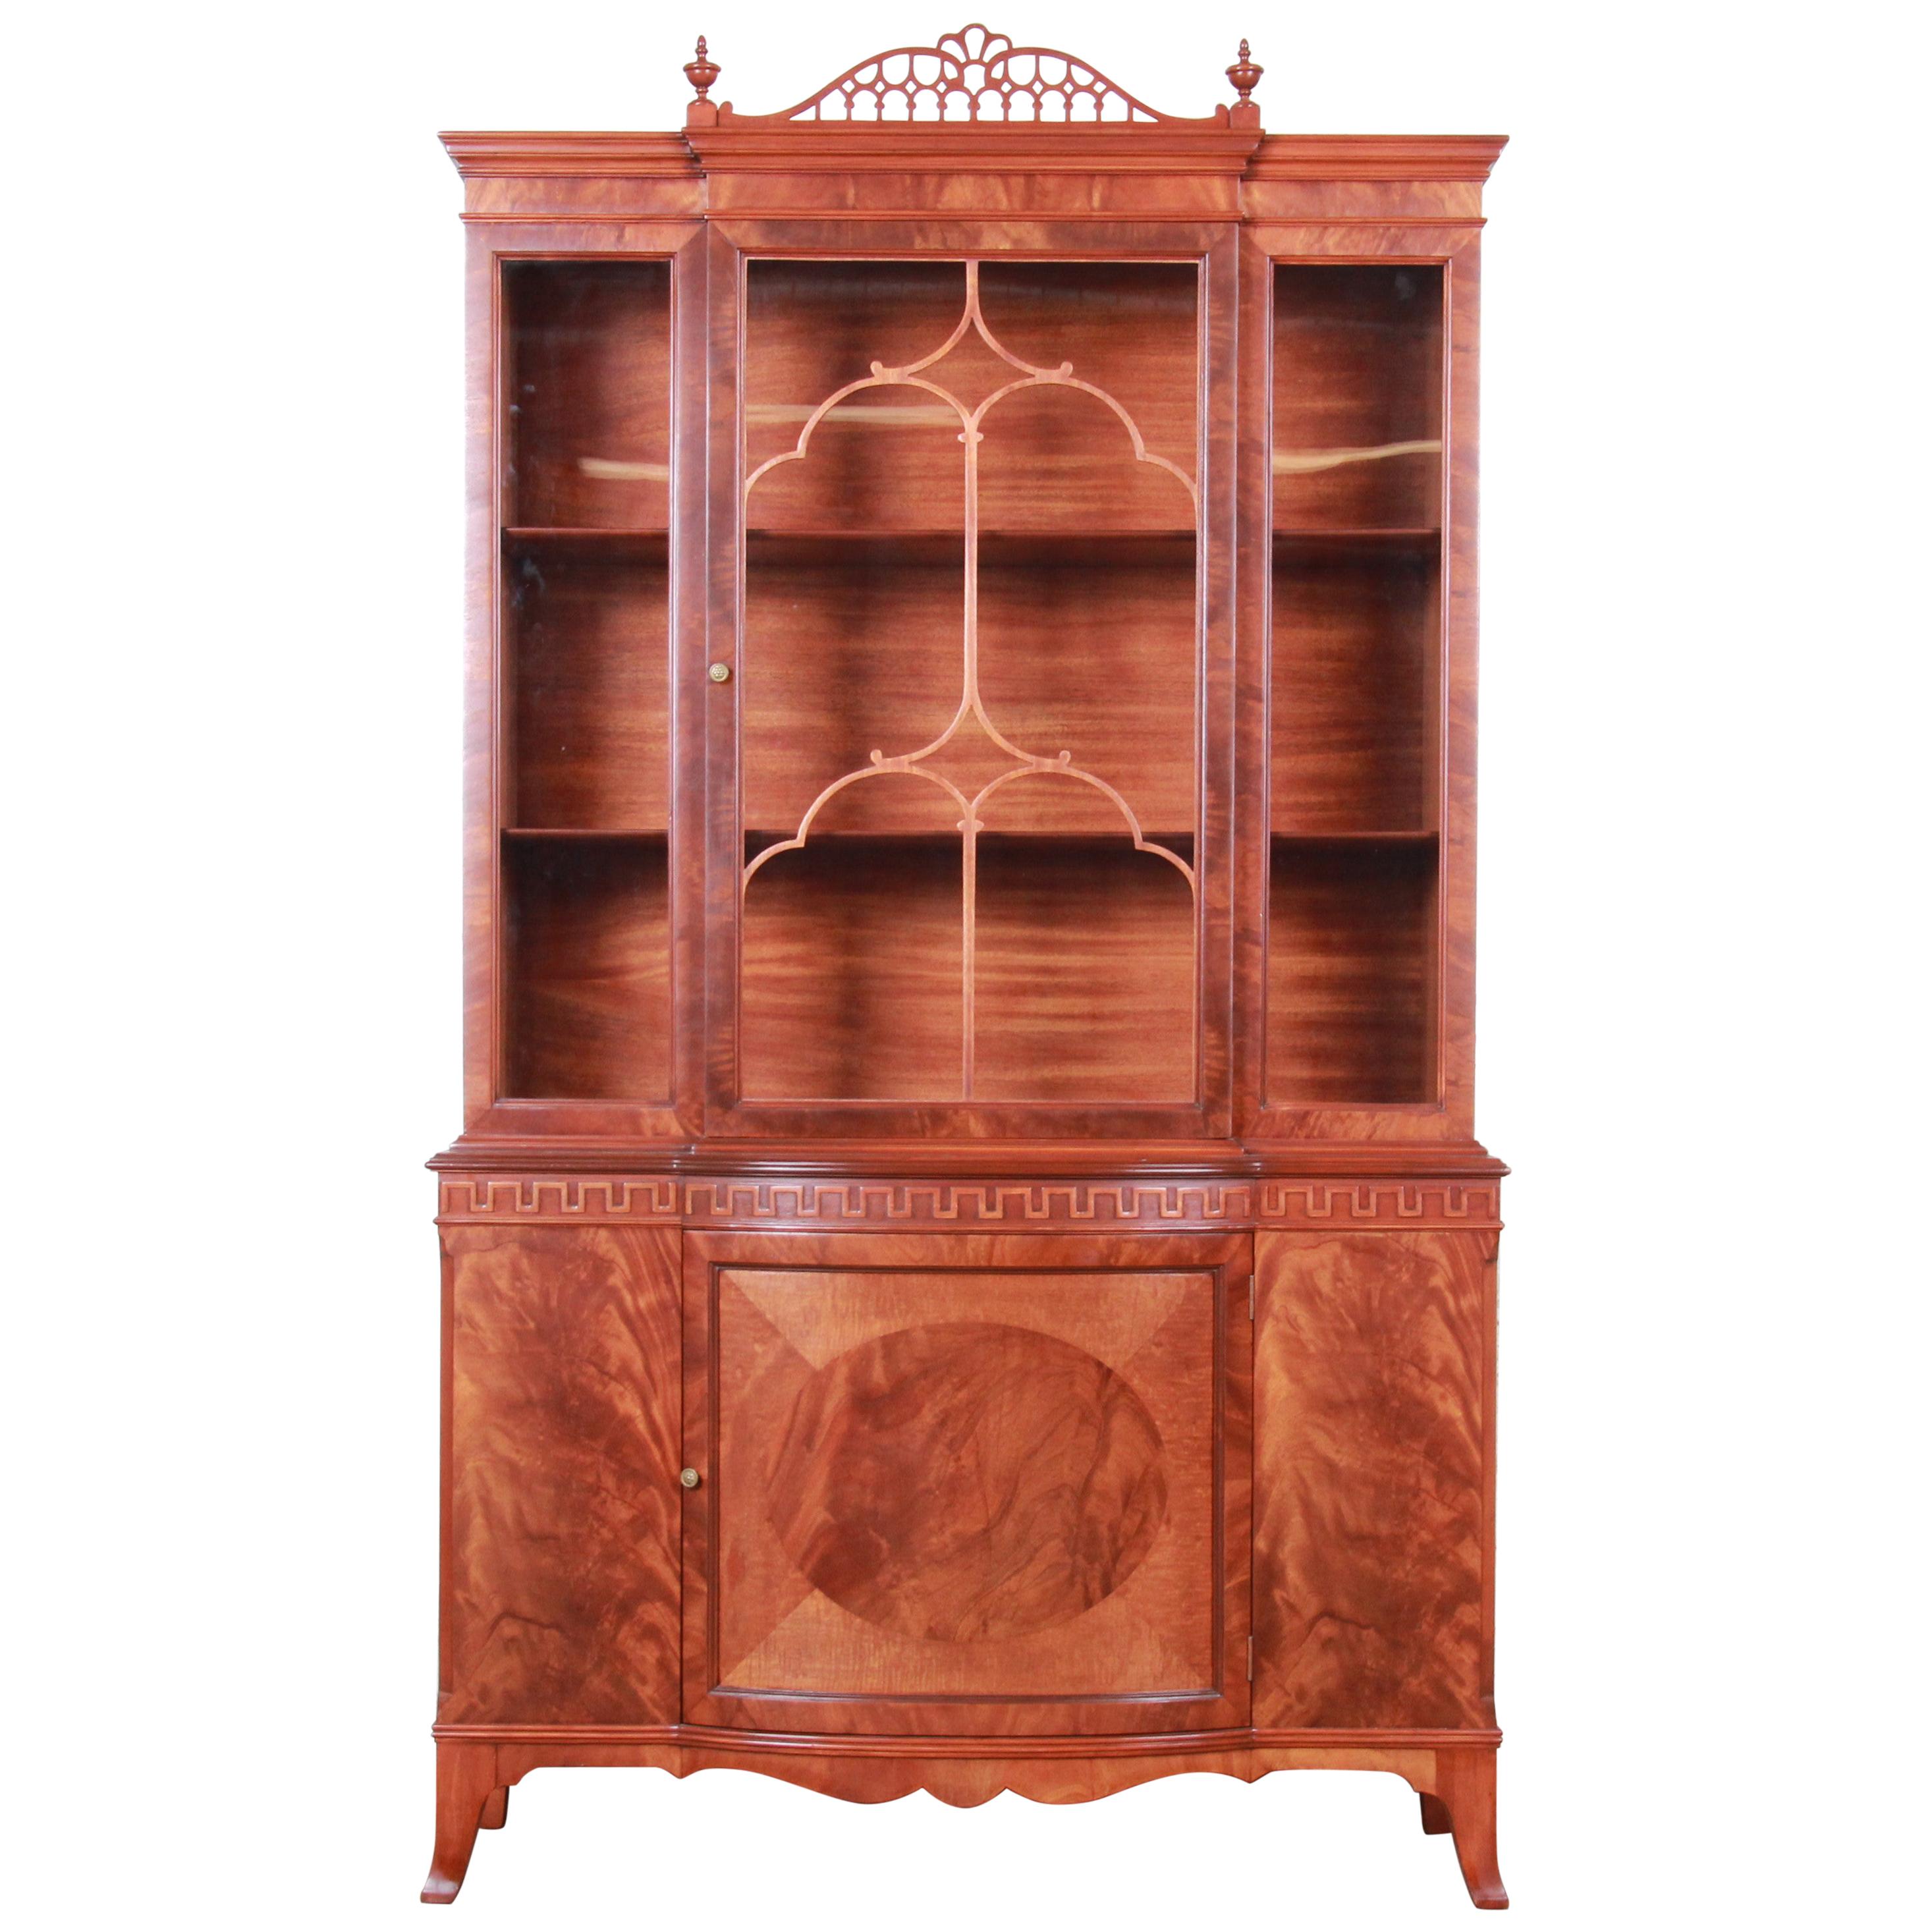 Romweber Flame Mahogany Breakfront Display Cabinet or Bookcase, circa 1940s